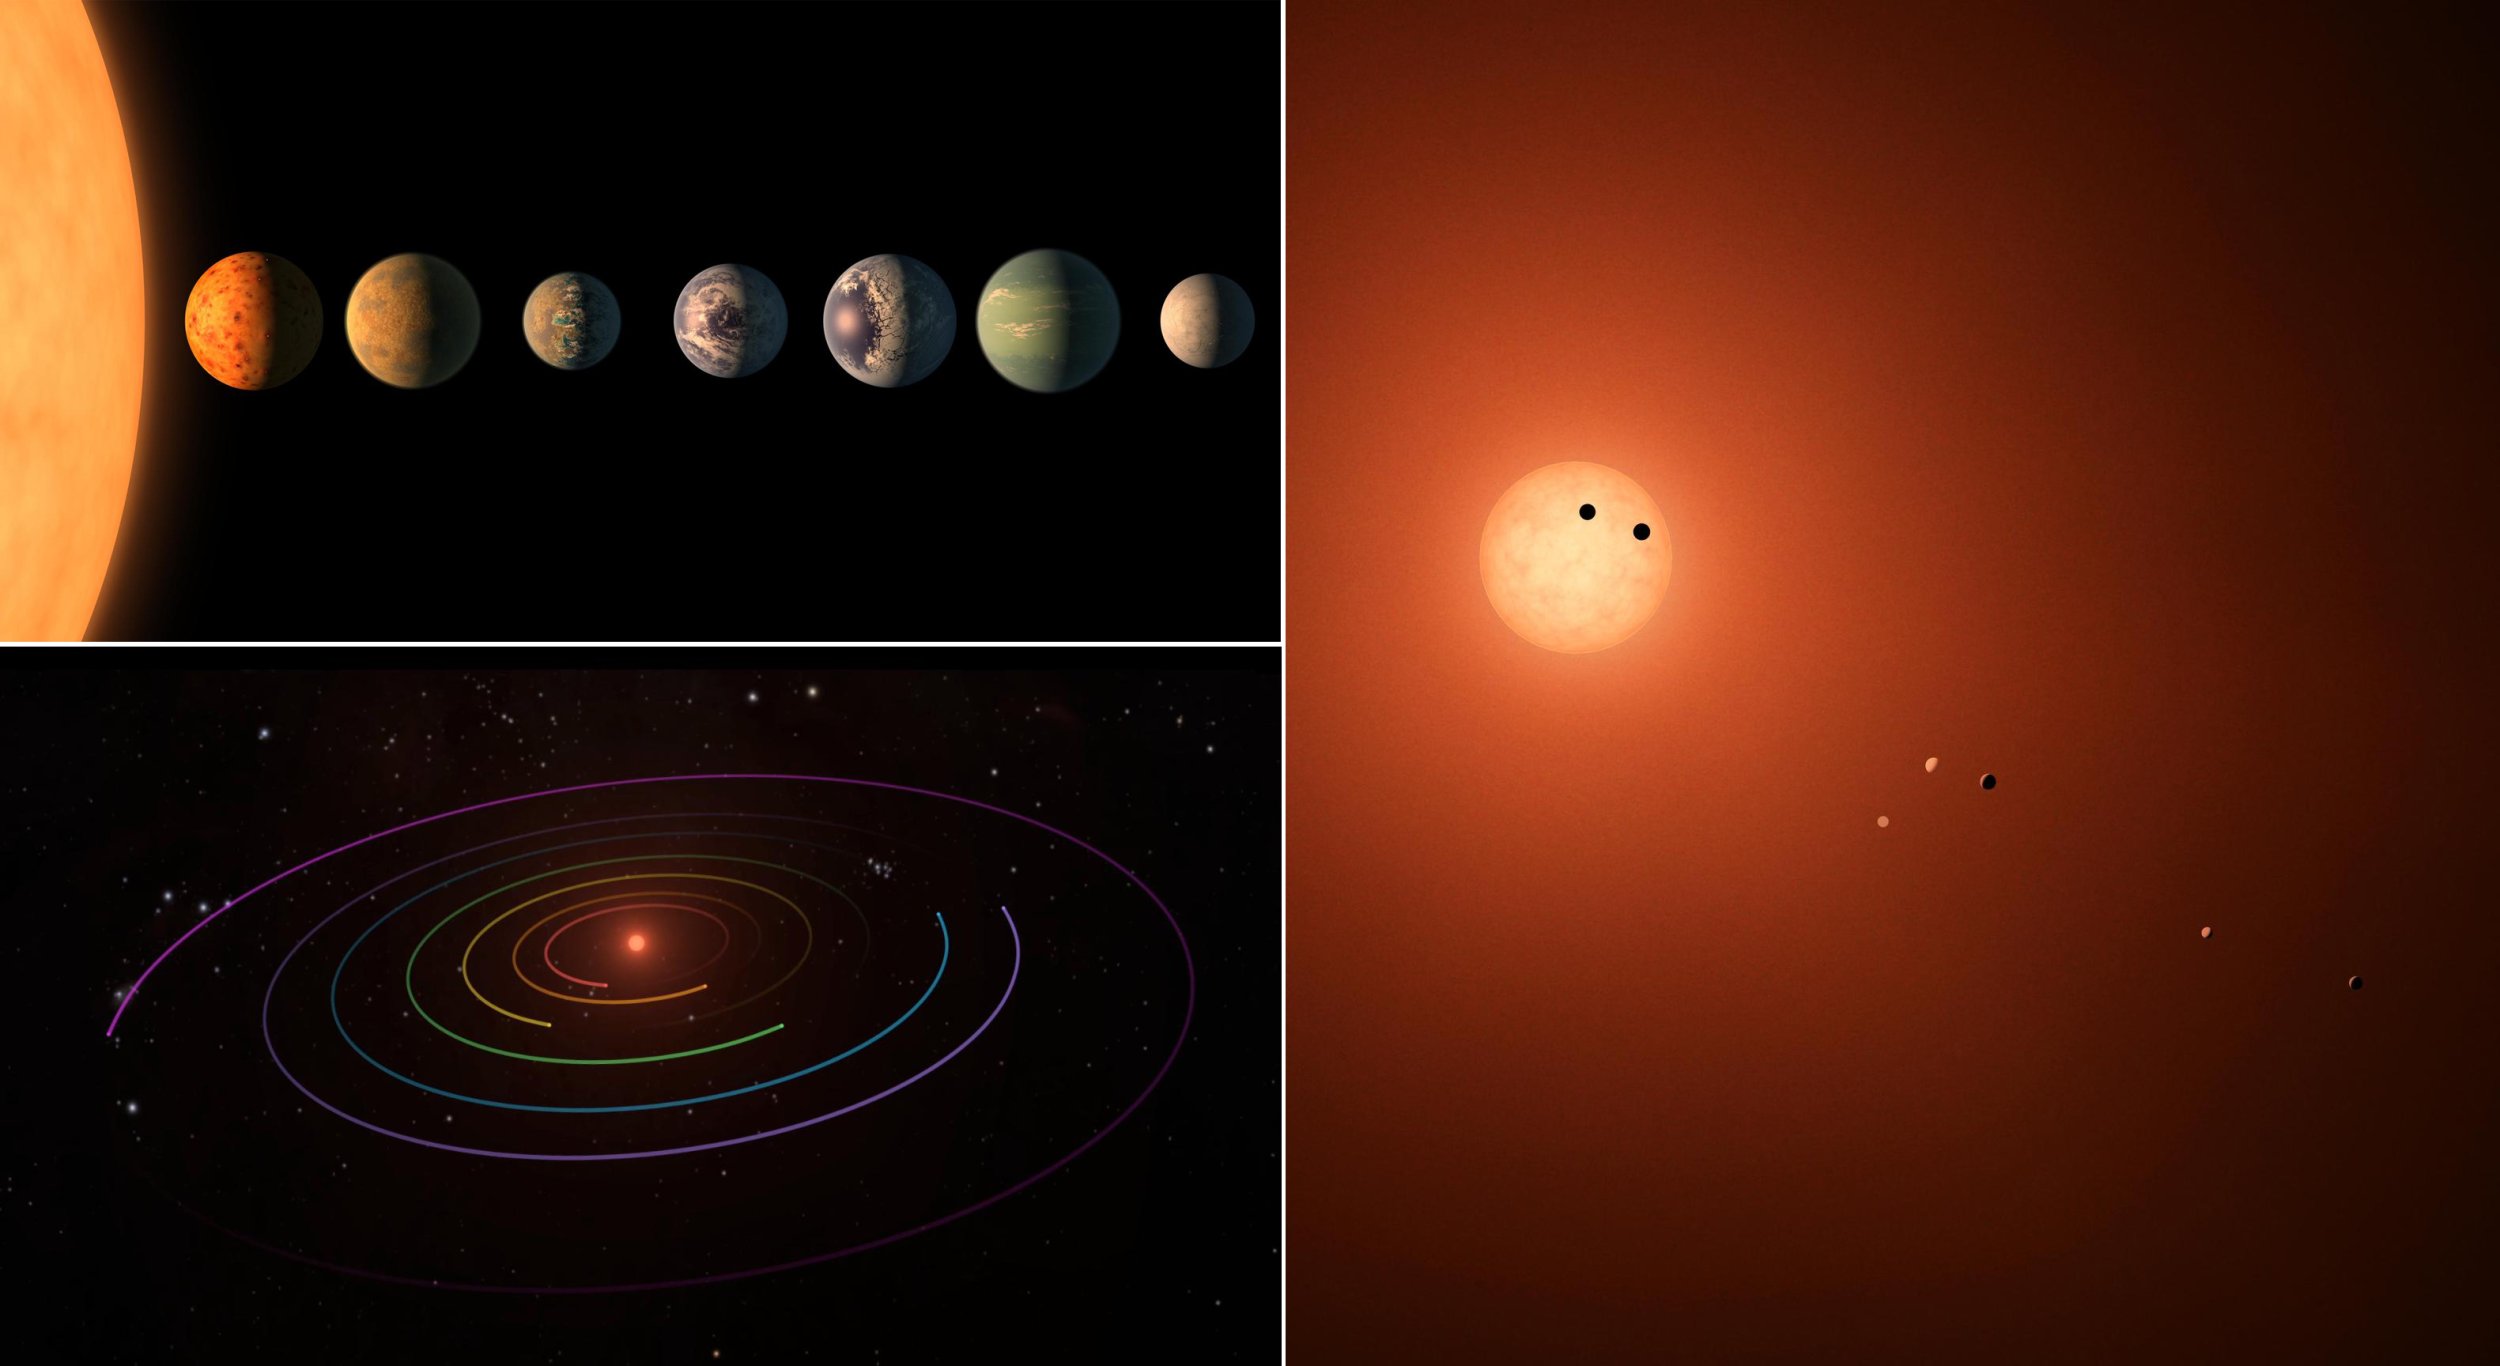 NASA Says Trappist-1 Planetary System Is Older Than Our Own Solar System